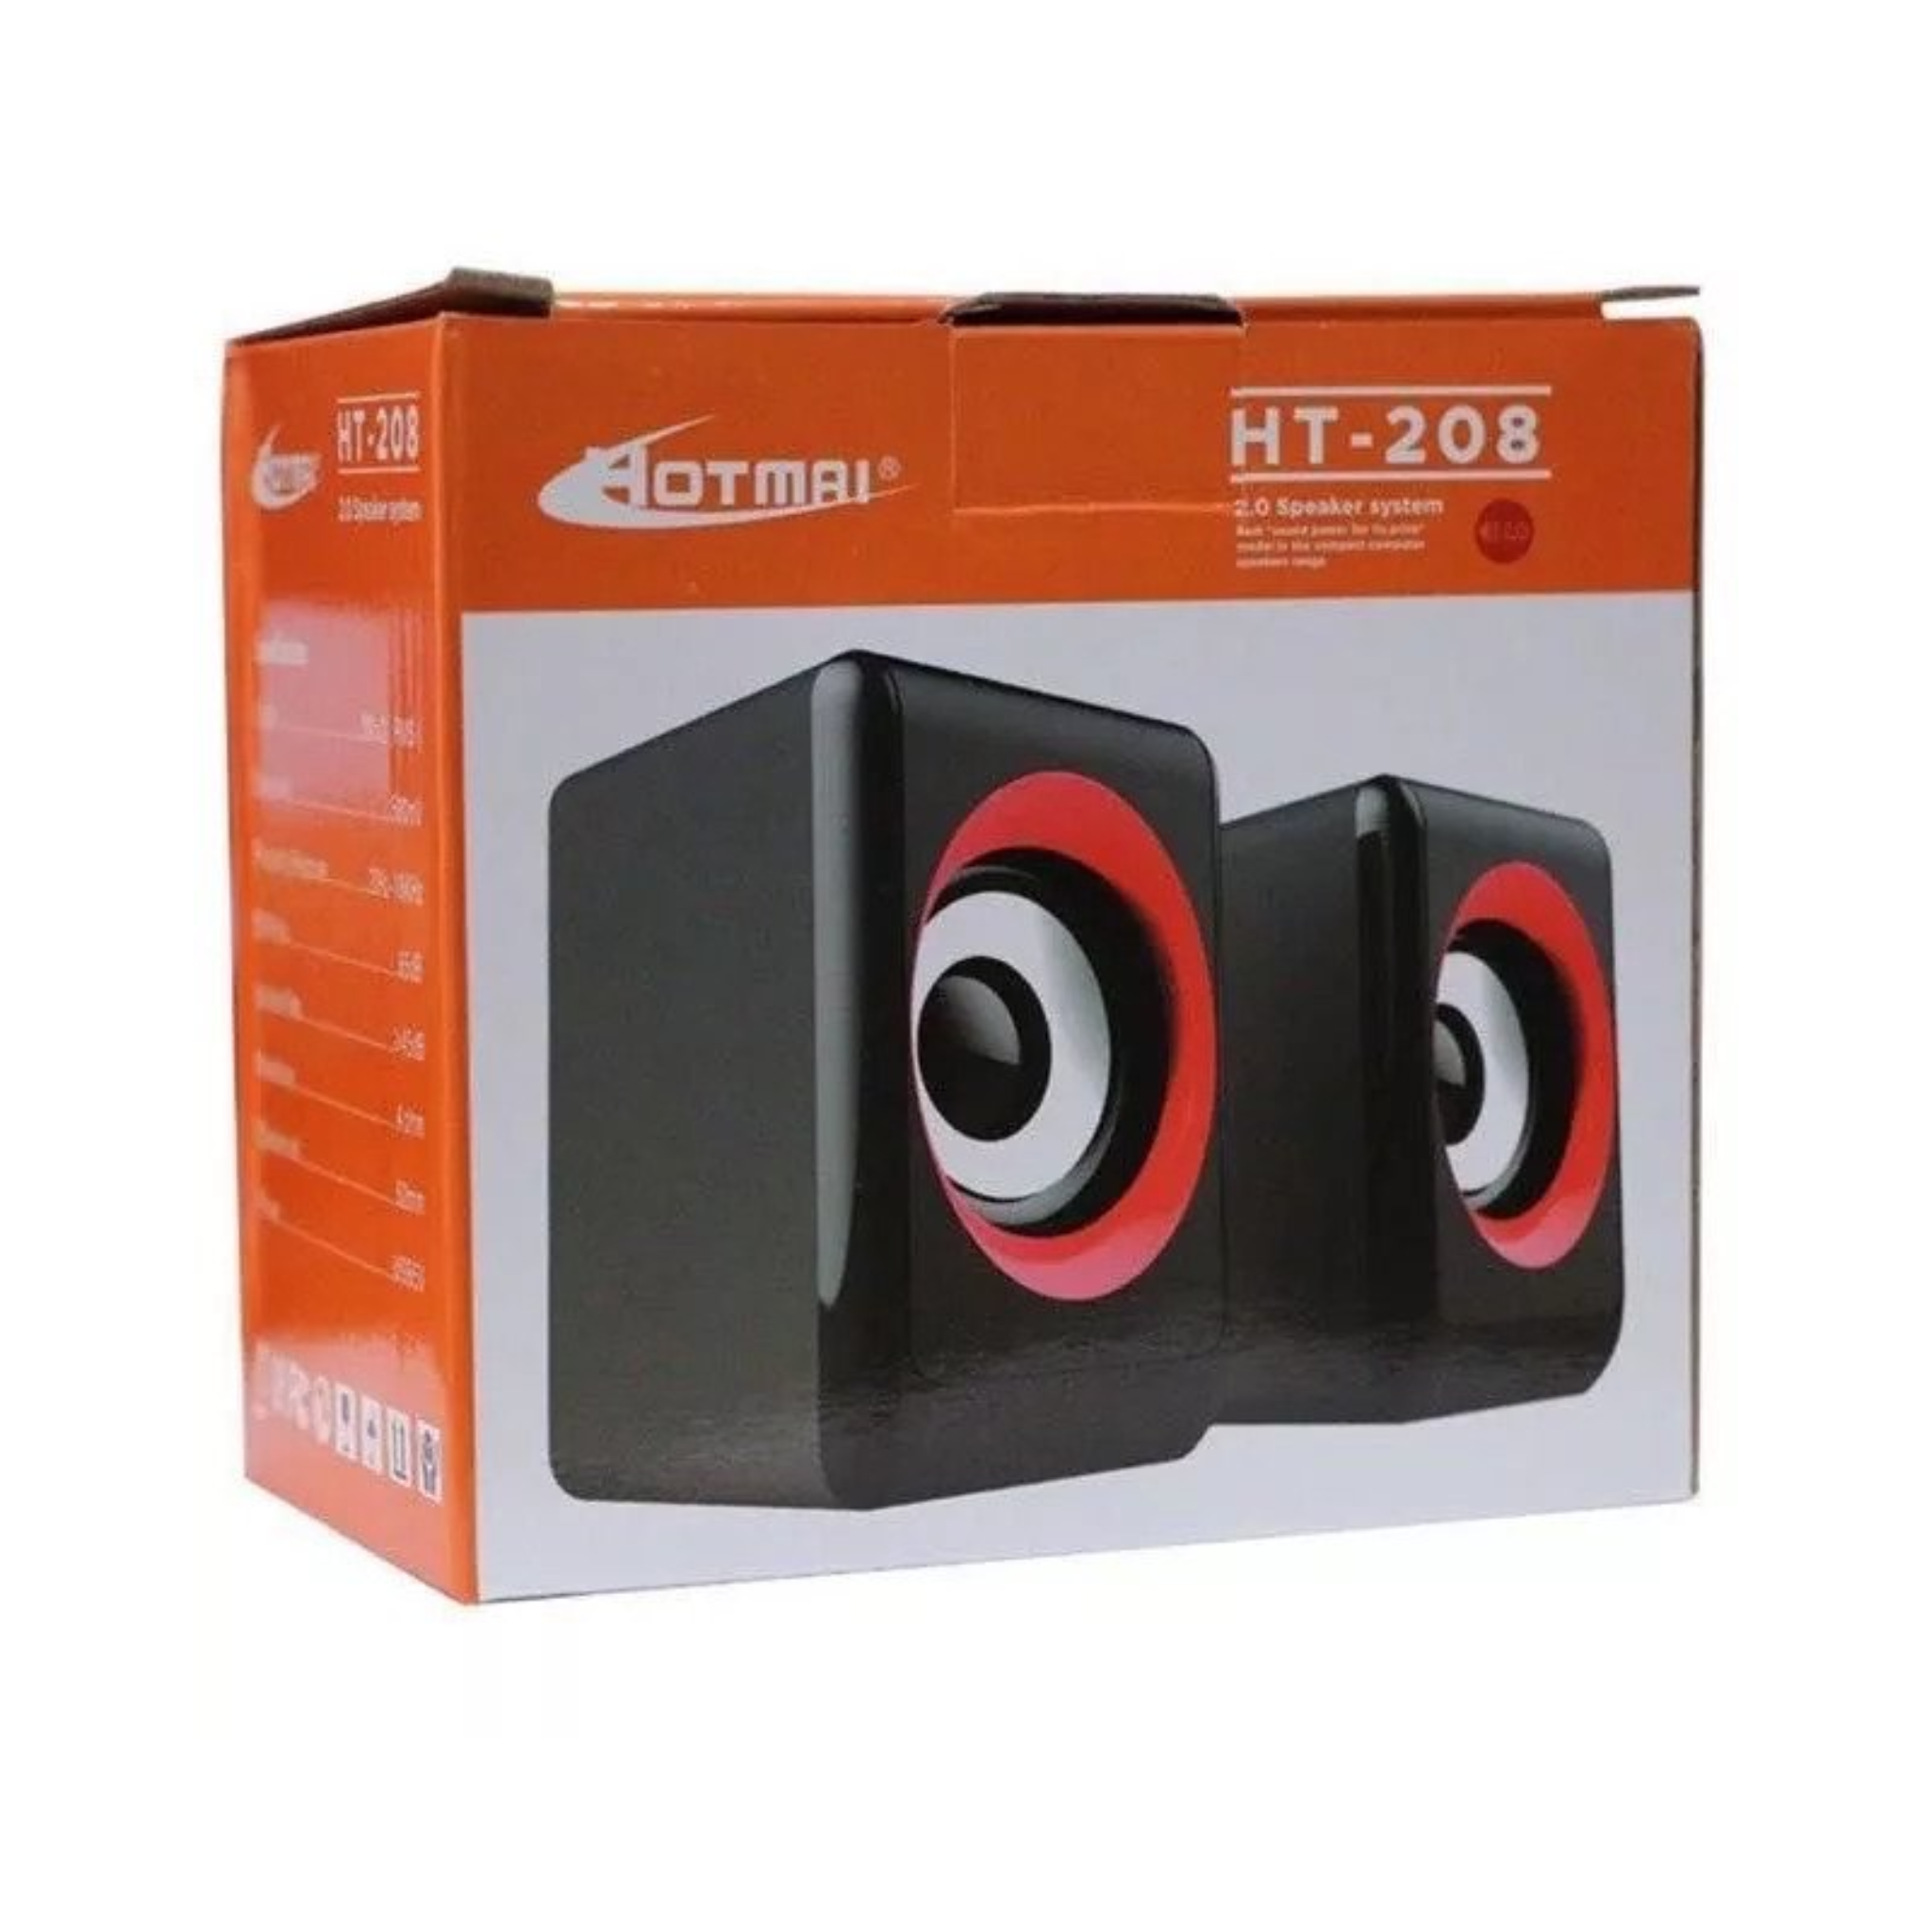 Multimedia Speaker, Best Sound Quality, for Laptop, Computer & LCD